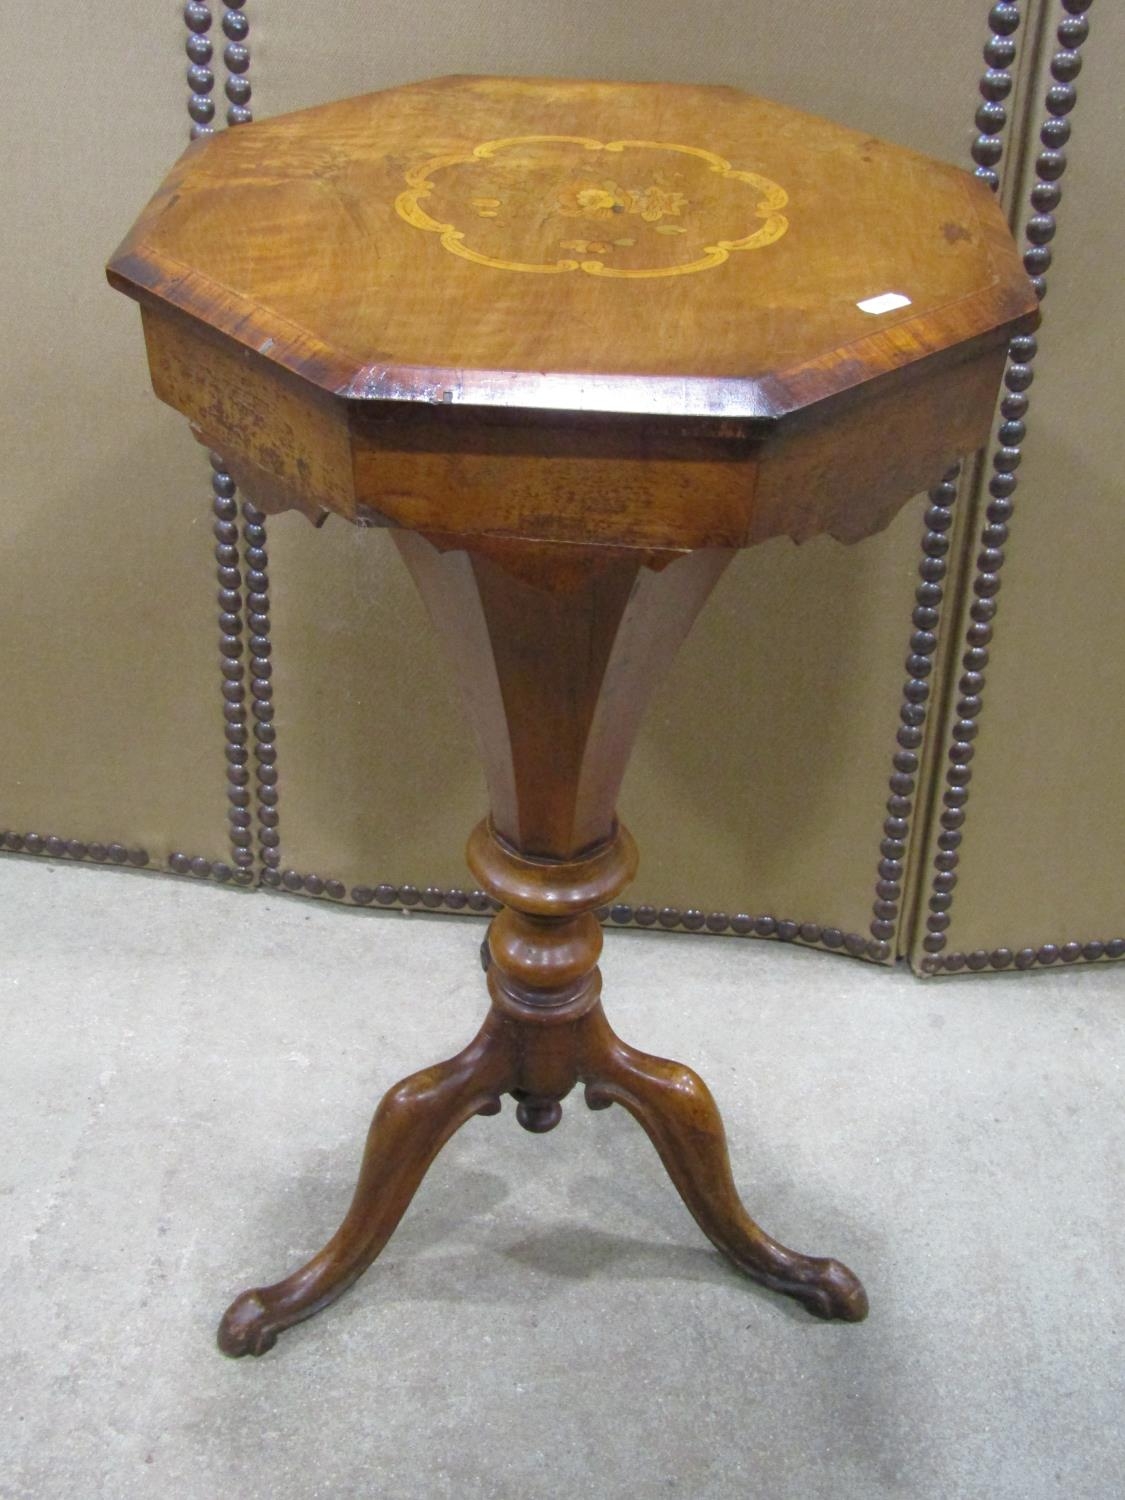 A Victorian walnut trumpet sewing table/work box, the hinged octagonal lid with inlaid floral detail